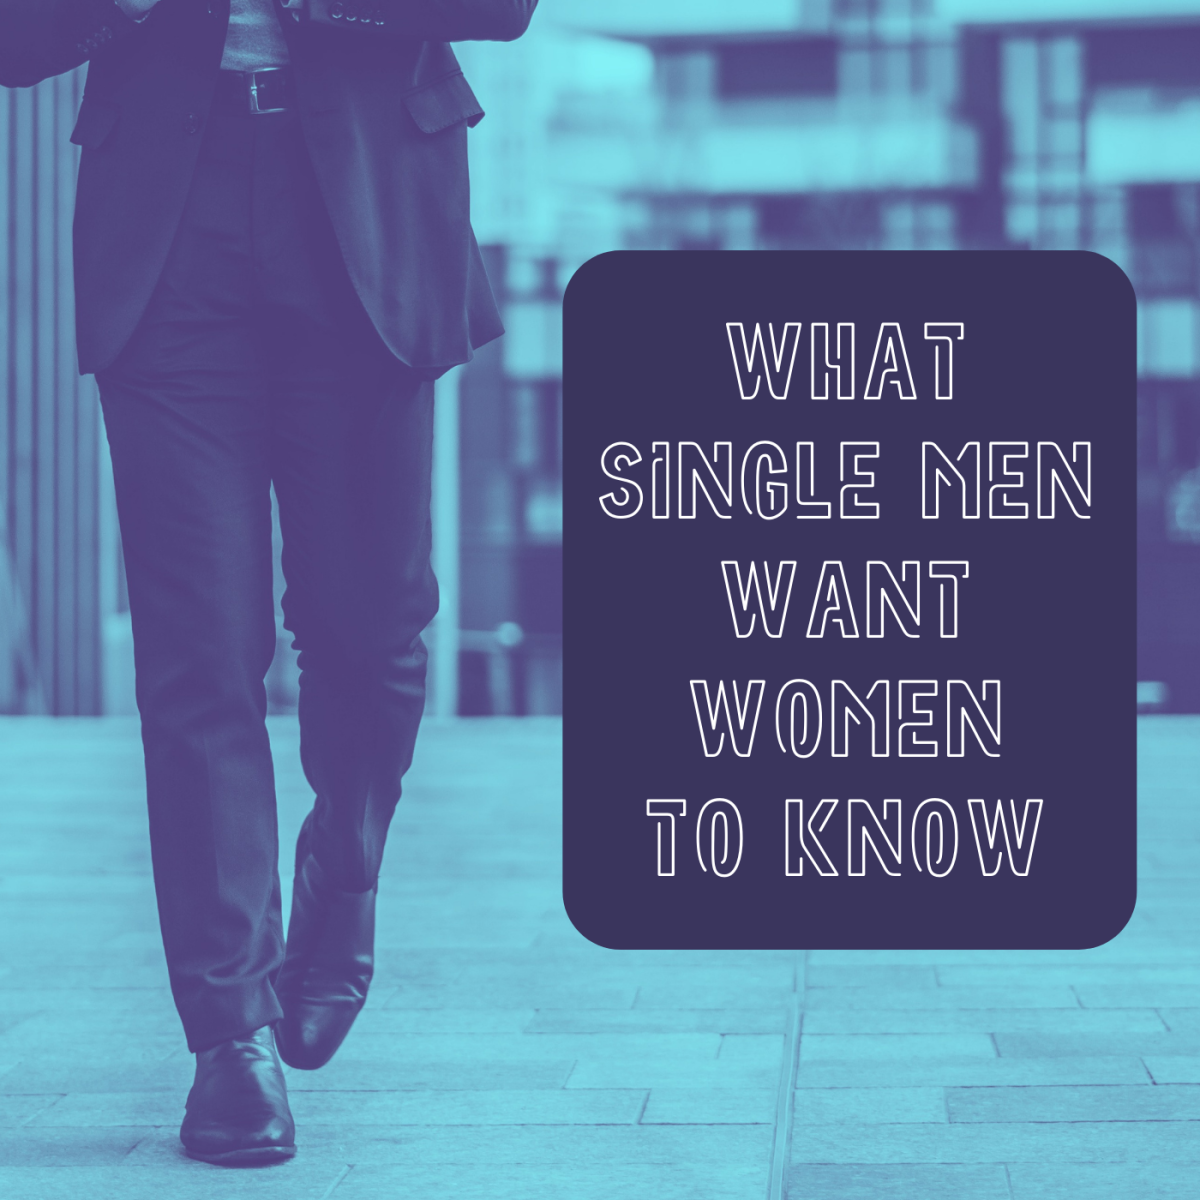 25 Things Single Men Want Women to Know